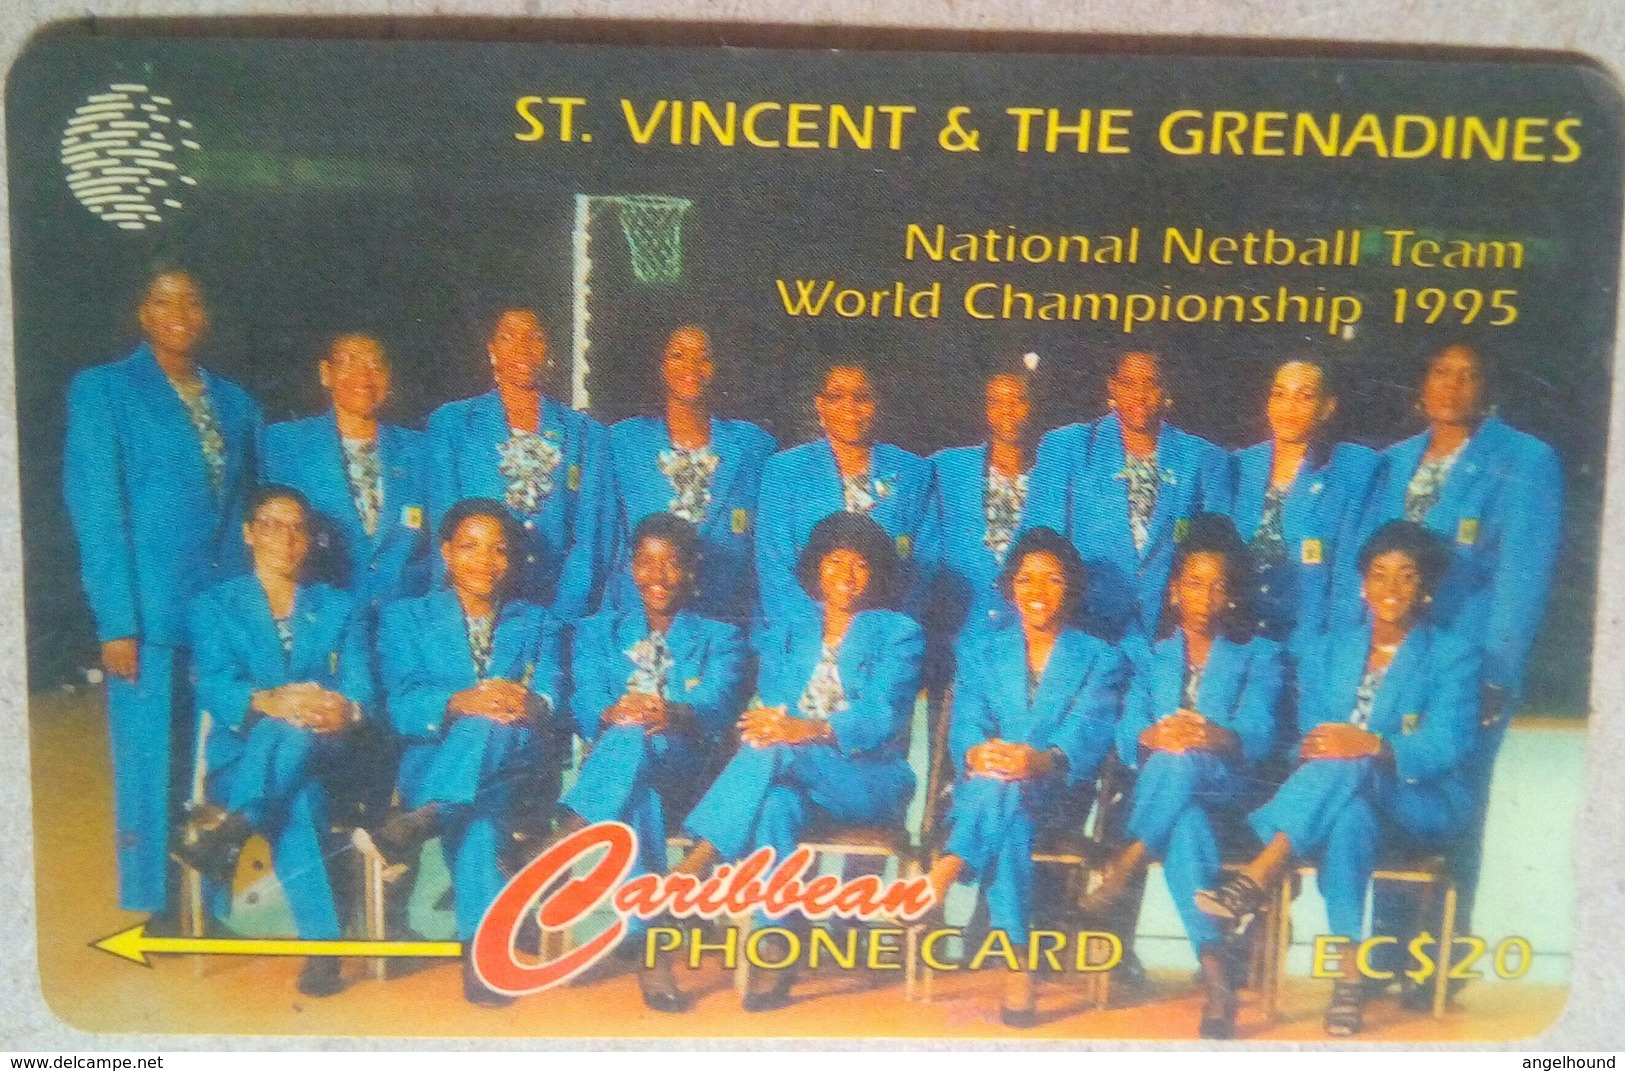 St Vincent And Grenadines Cable And Wireless 199SVDB  EC$20 " Netball Team 1995 " - St. Vincent & The Grenadines